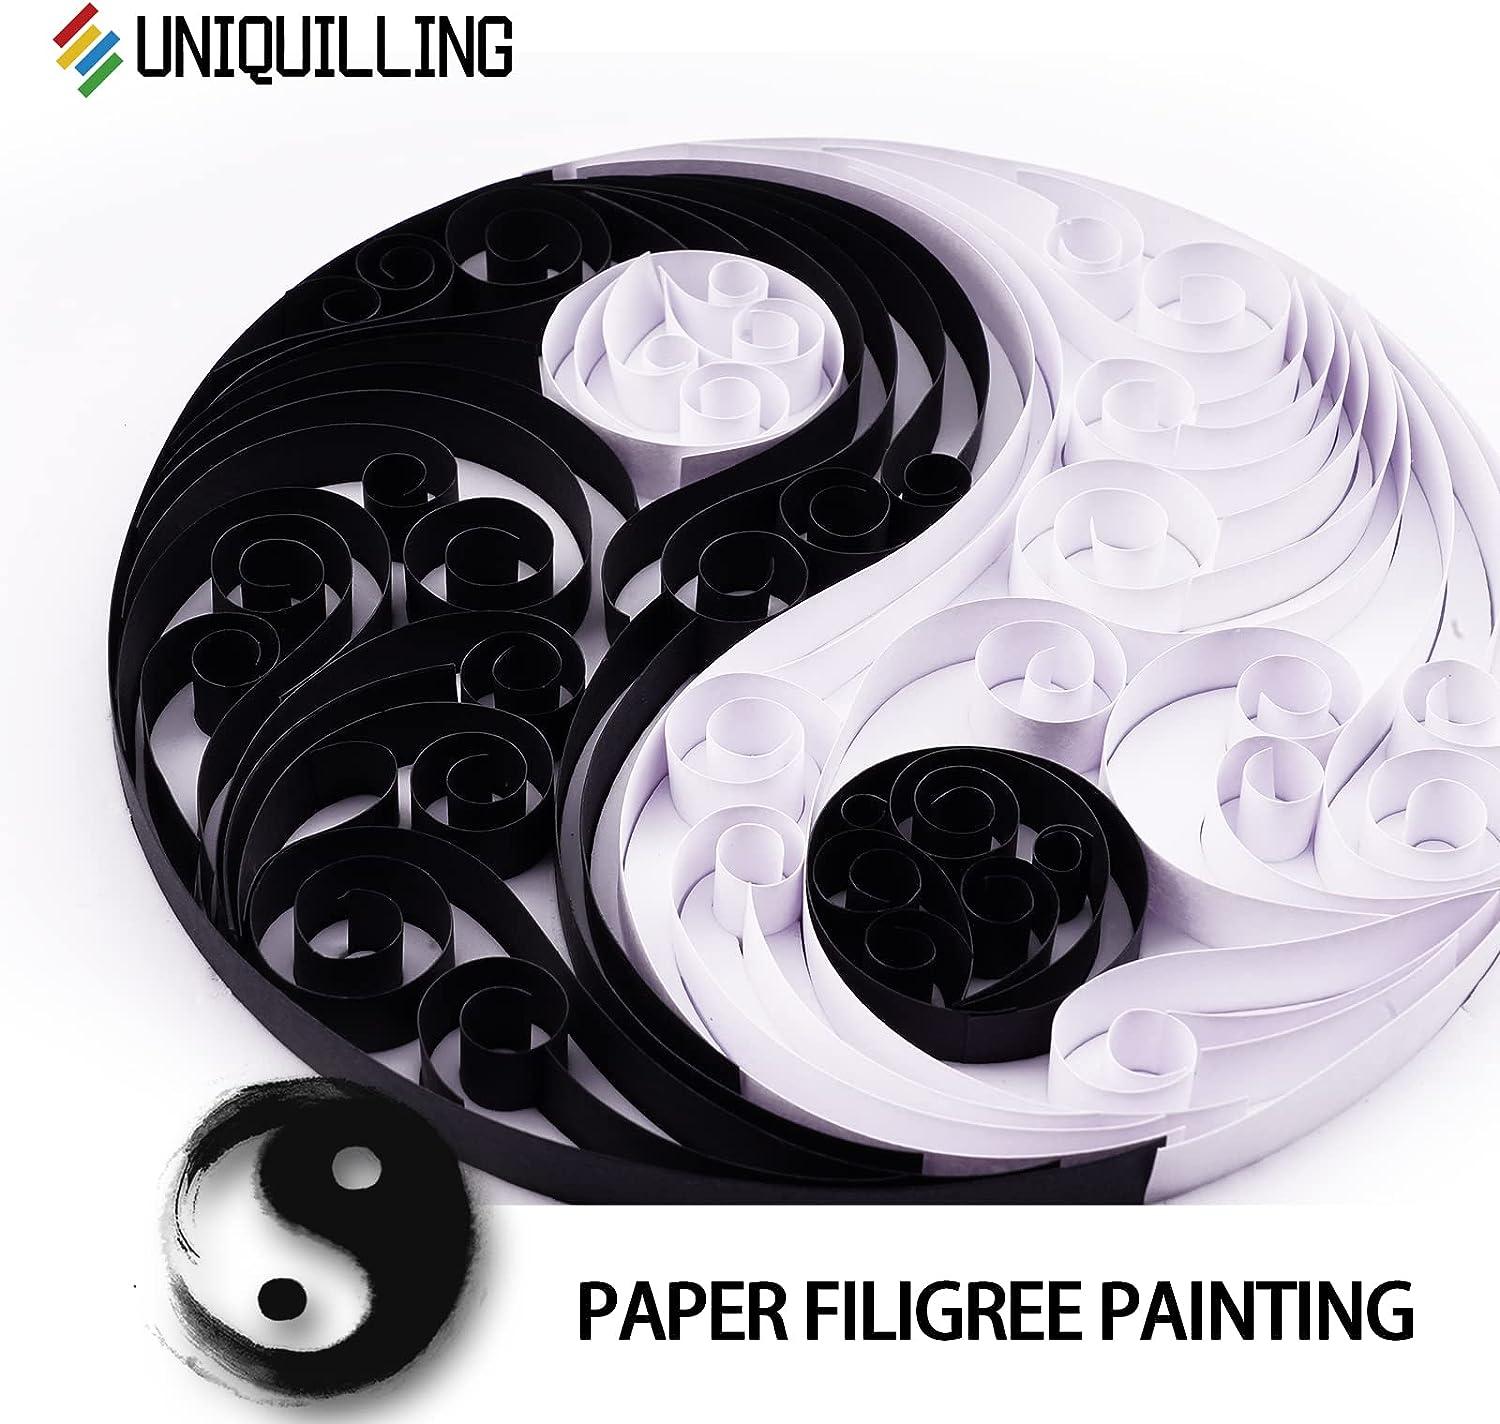 Uniquilling Quilling Paper Quilling Kit for Adults Beginner, 8 * 10-inch  Letters, Exquisite DIY Paper Filigree Painting Kits Quilling Tools, Home  Room